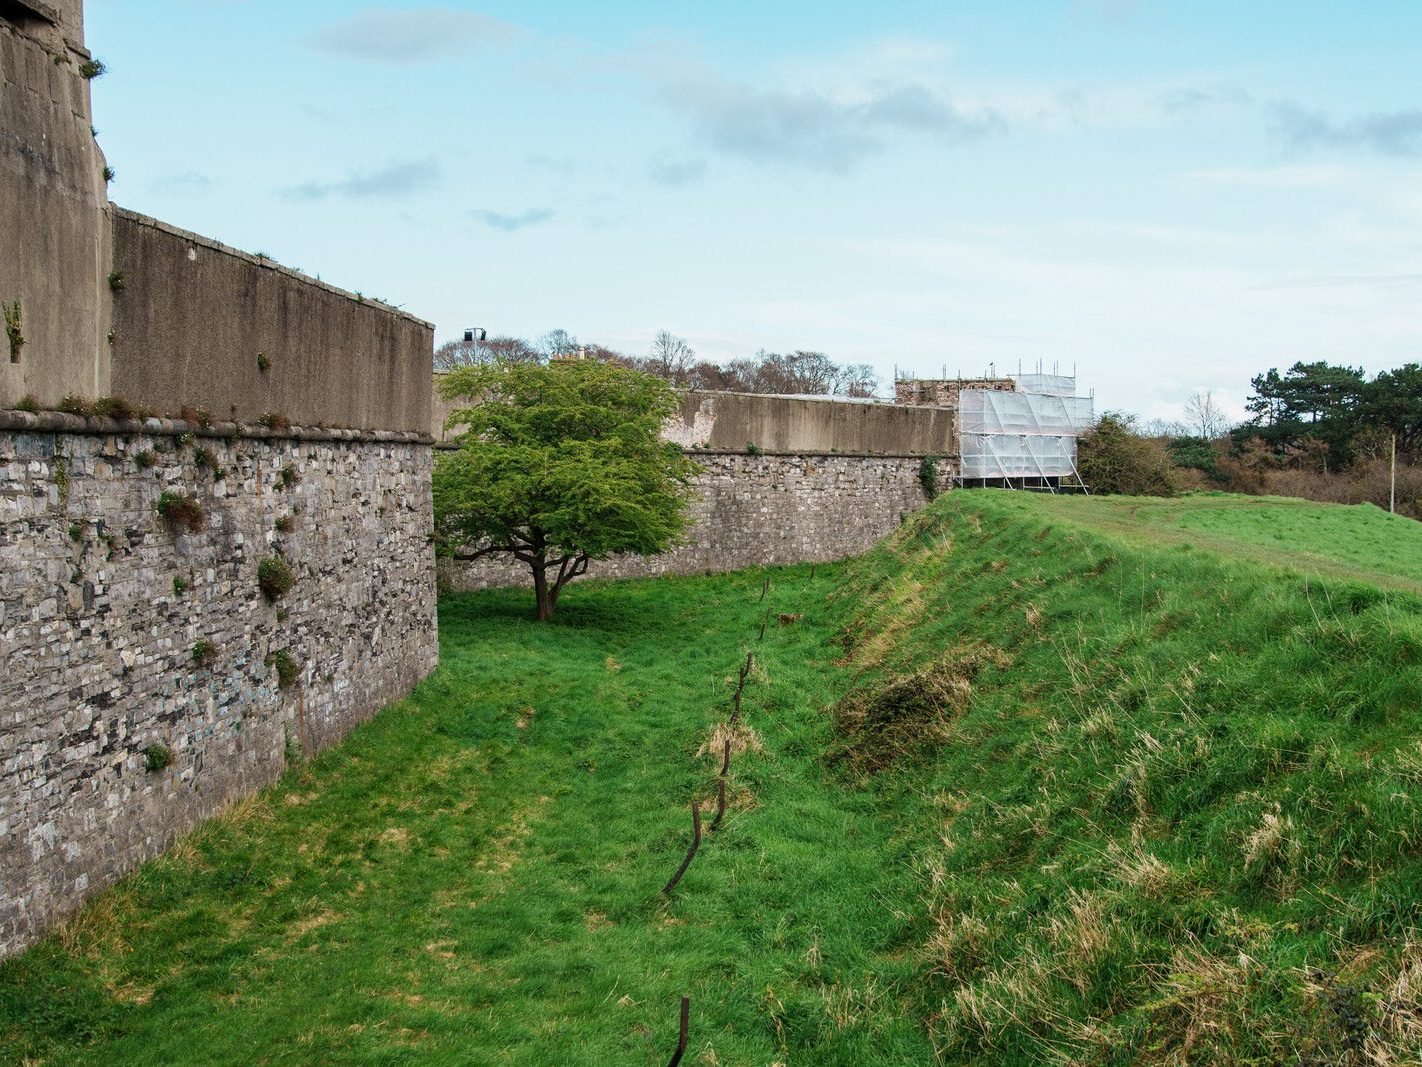 THE MAGAZINE FORT IN PHOENIX PARK [THERE IS MUCH INFORMATION AND A COMPLICATED STORY]-223496-1